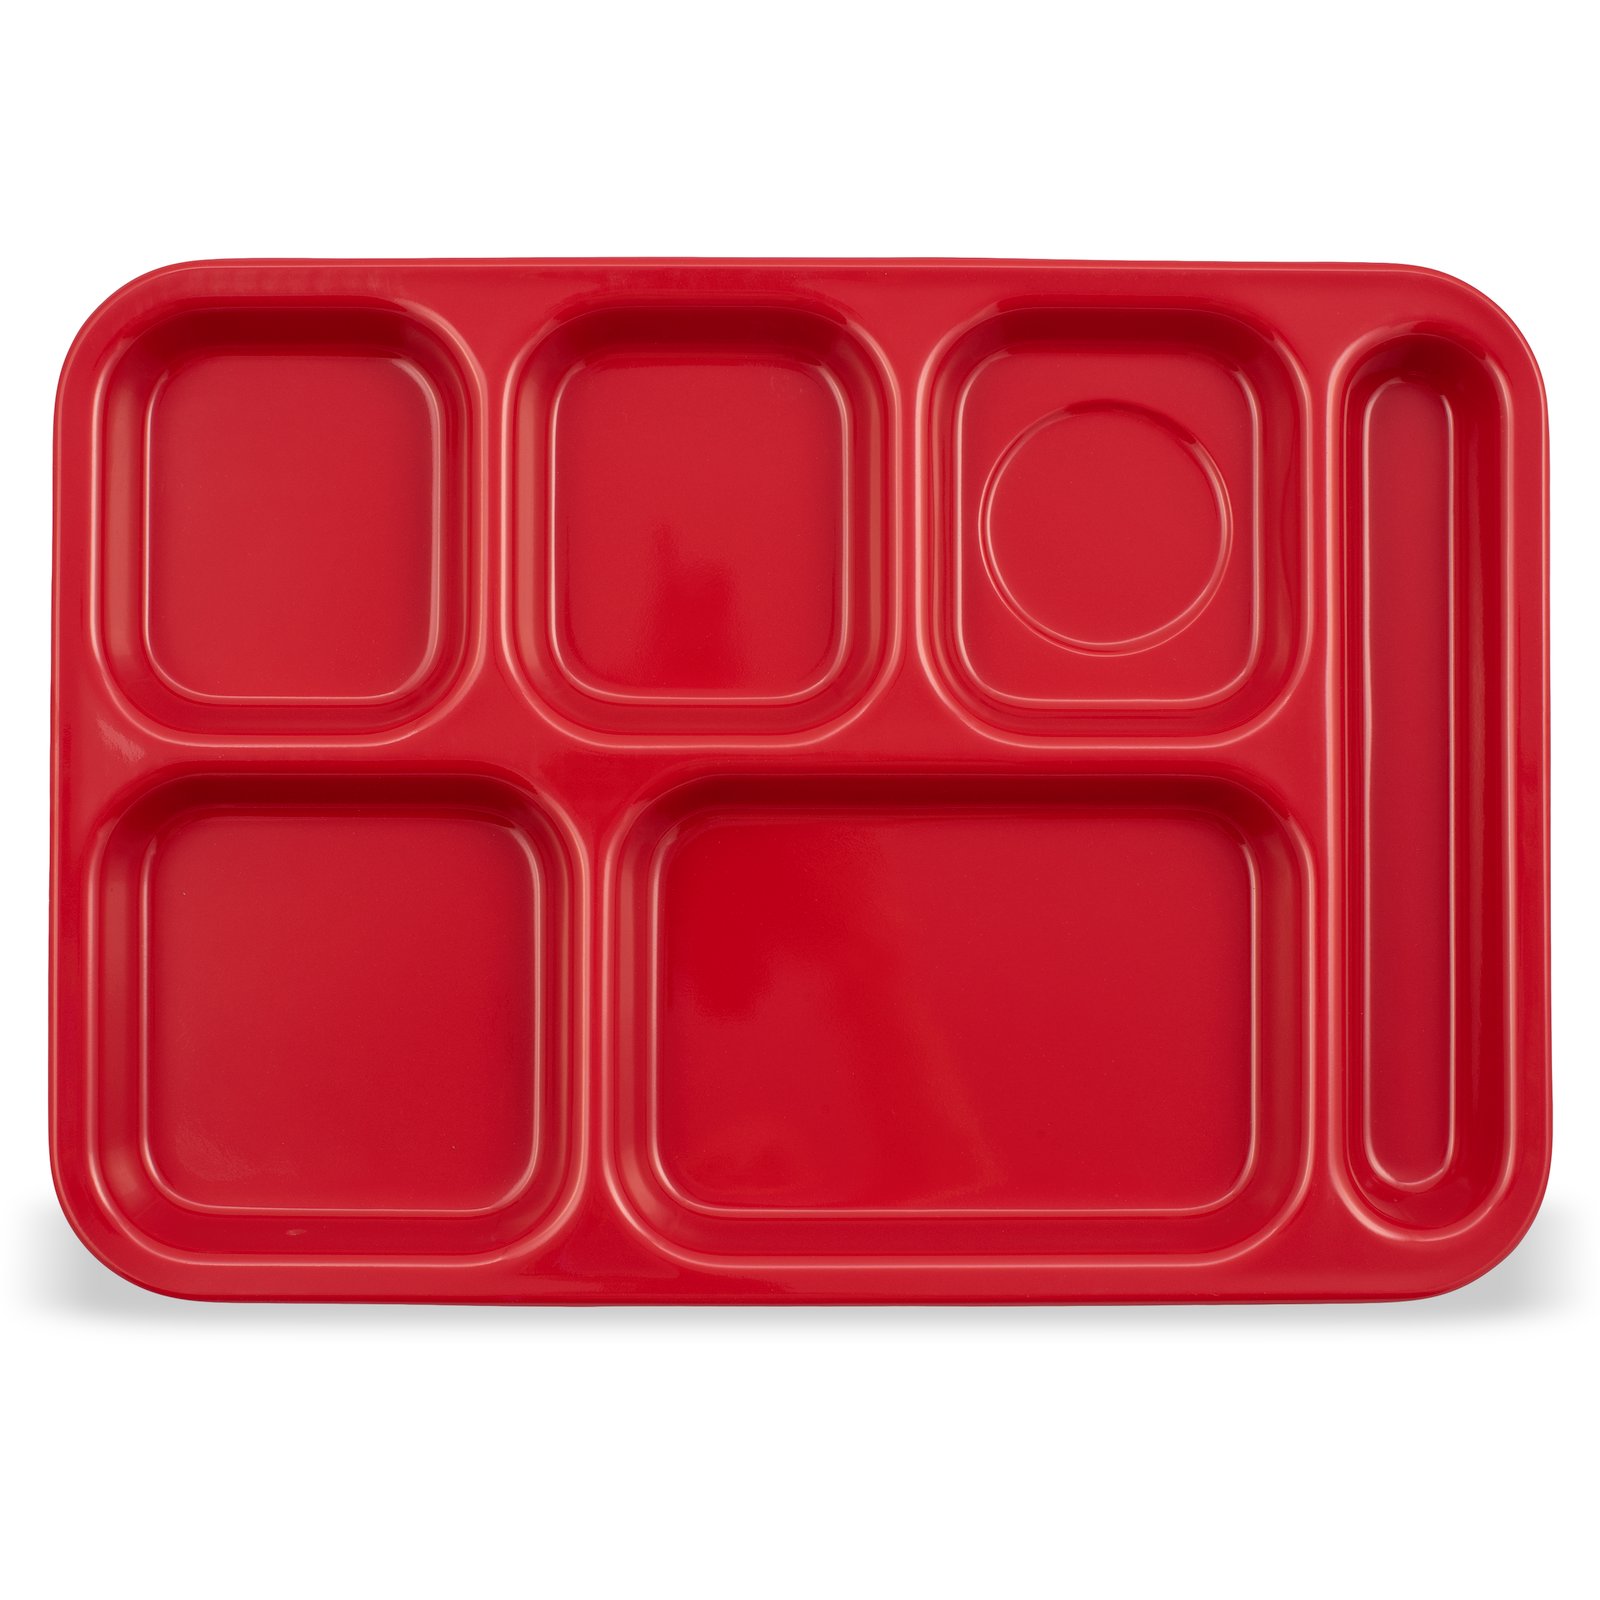 35 Compartment Parts Tray